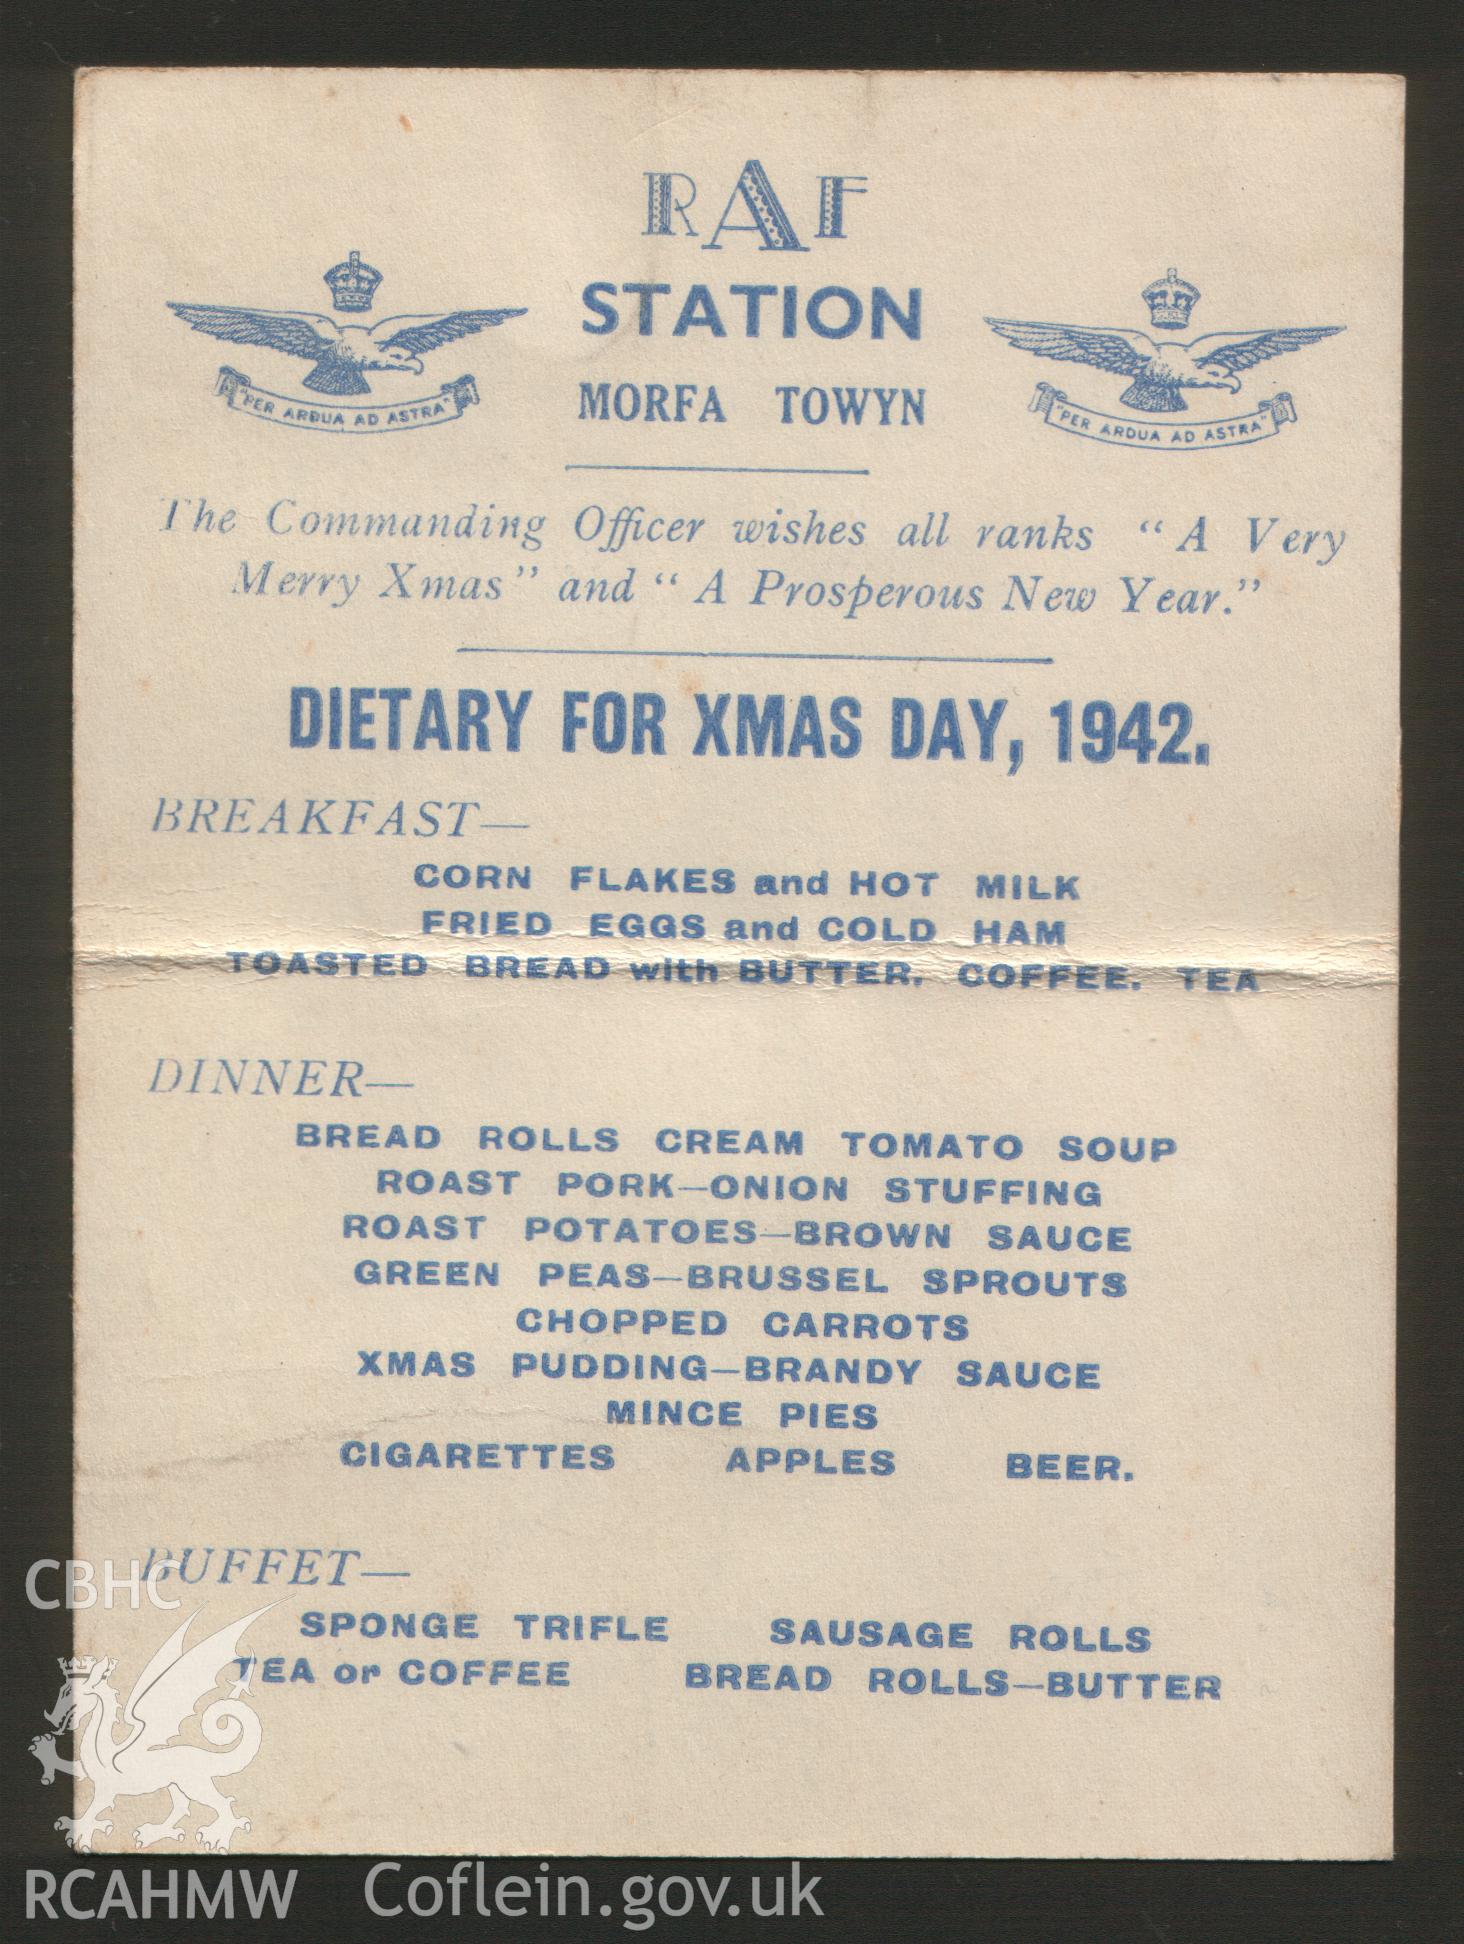 Digital copy of the 1942 Christmas Day Menu from RAF Station Morfa, Towyn. Donated by David Pearce whose father Ken Pearce was stationed there in the 1940's.